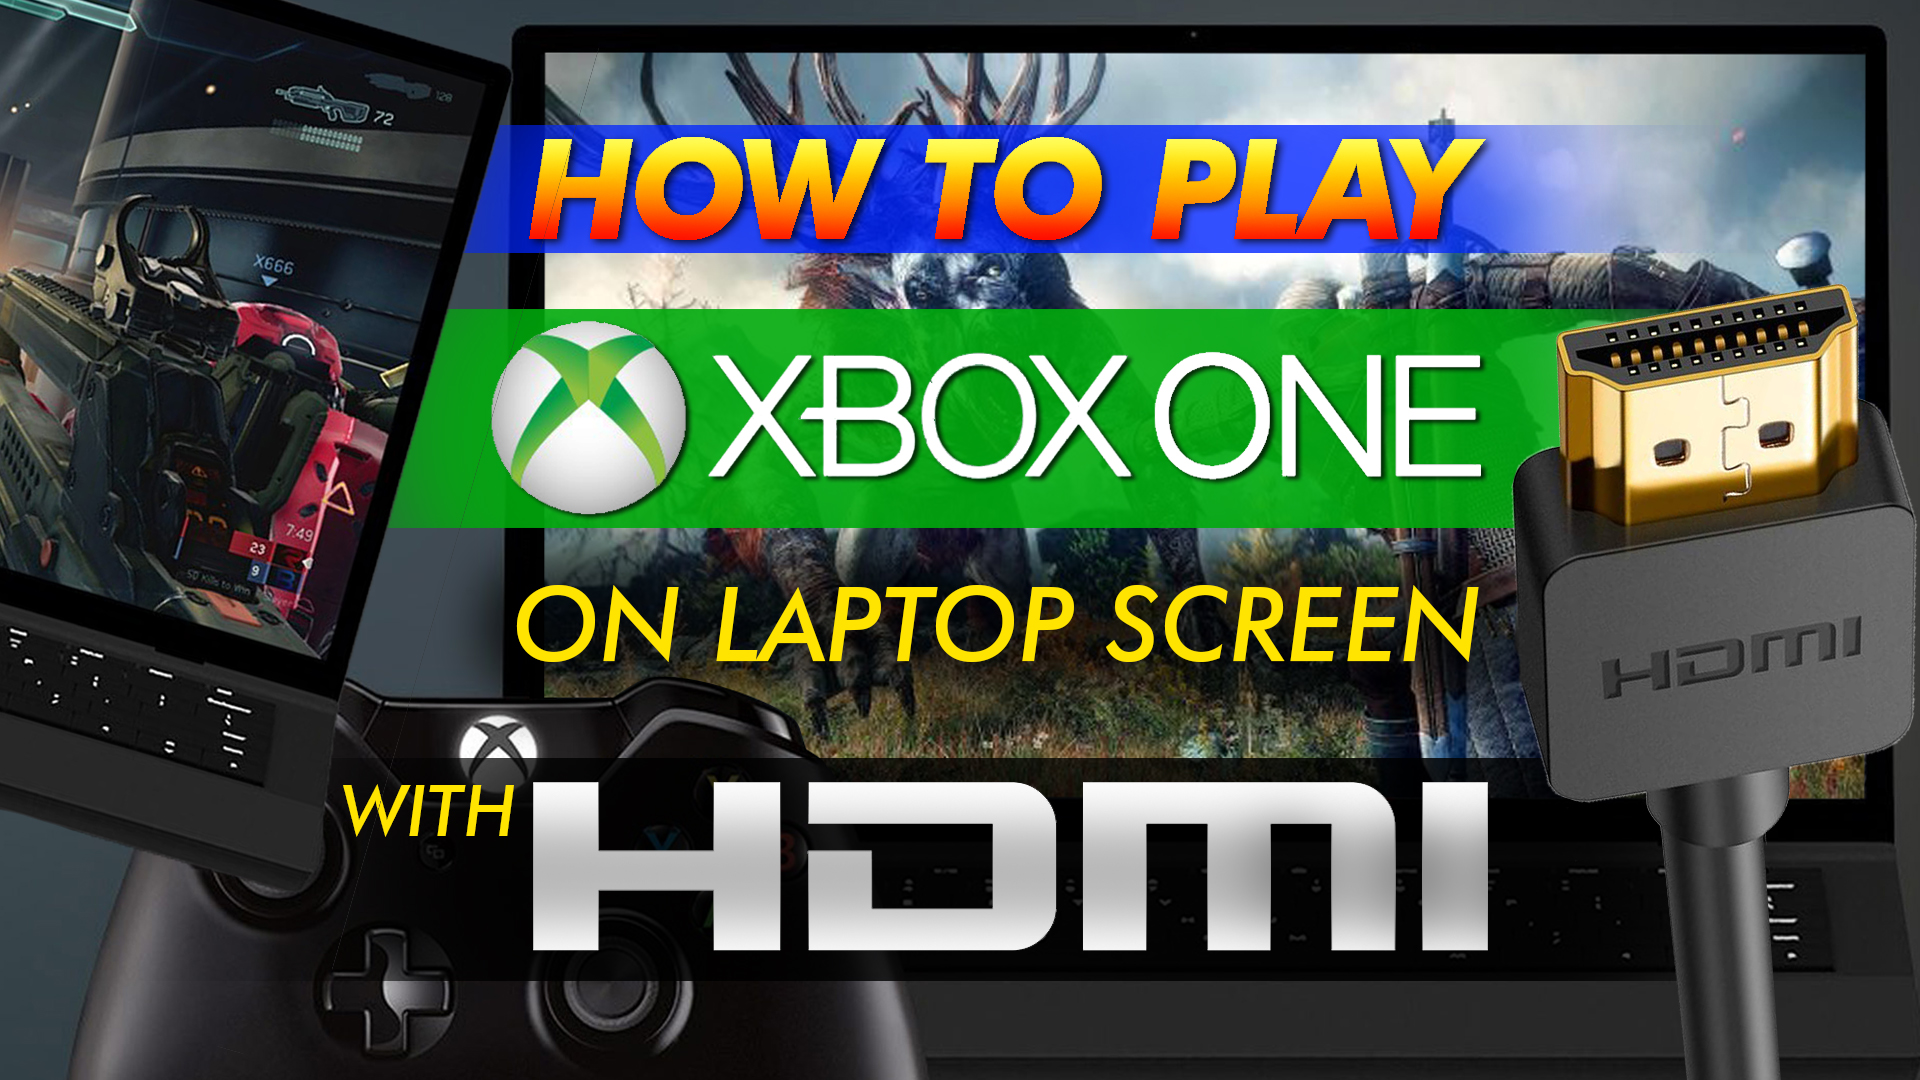 How to Play XBOX One on Laptop with HDMI